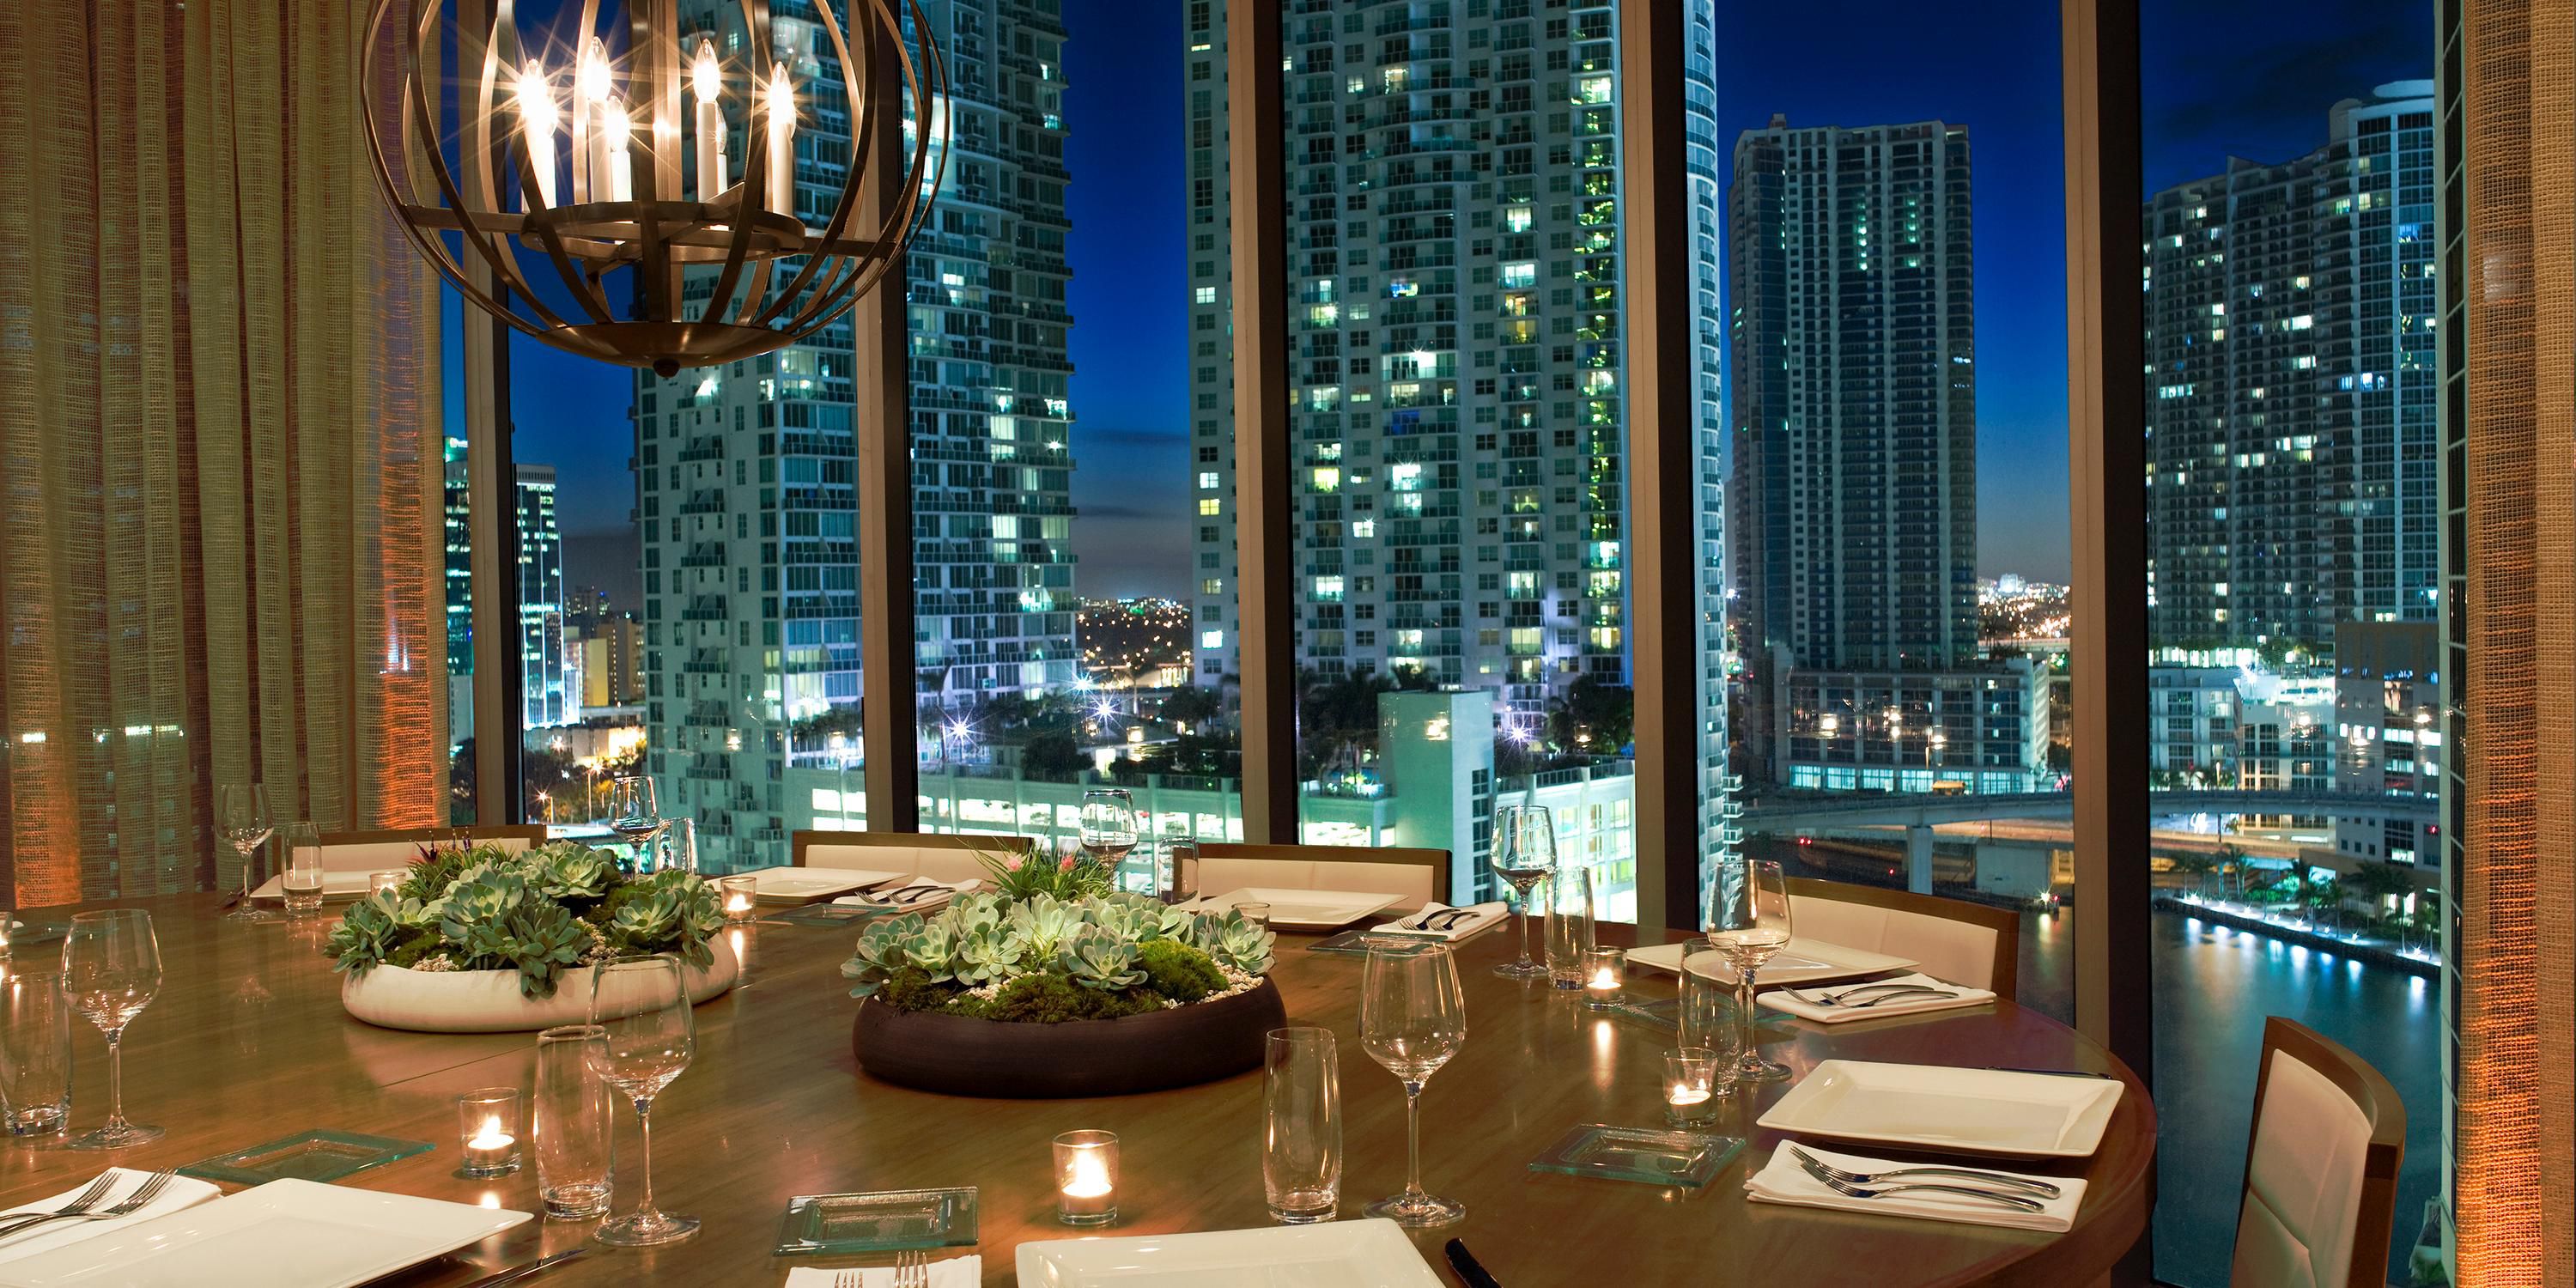 Make the Area 31 experience your own with a private dining event. Options include a room with floor-to-ceiling windows, poolside cabanas and casitas, the Terrace Lounge and Pool Deck, and a room with a private balcony. No matter what you choose, you're guaranteed superb service and stunning scenery.